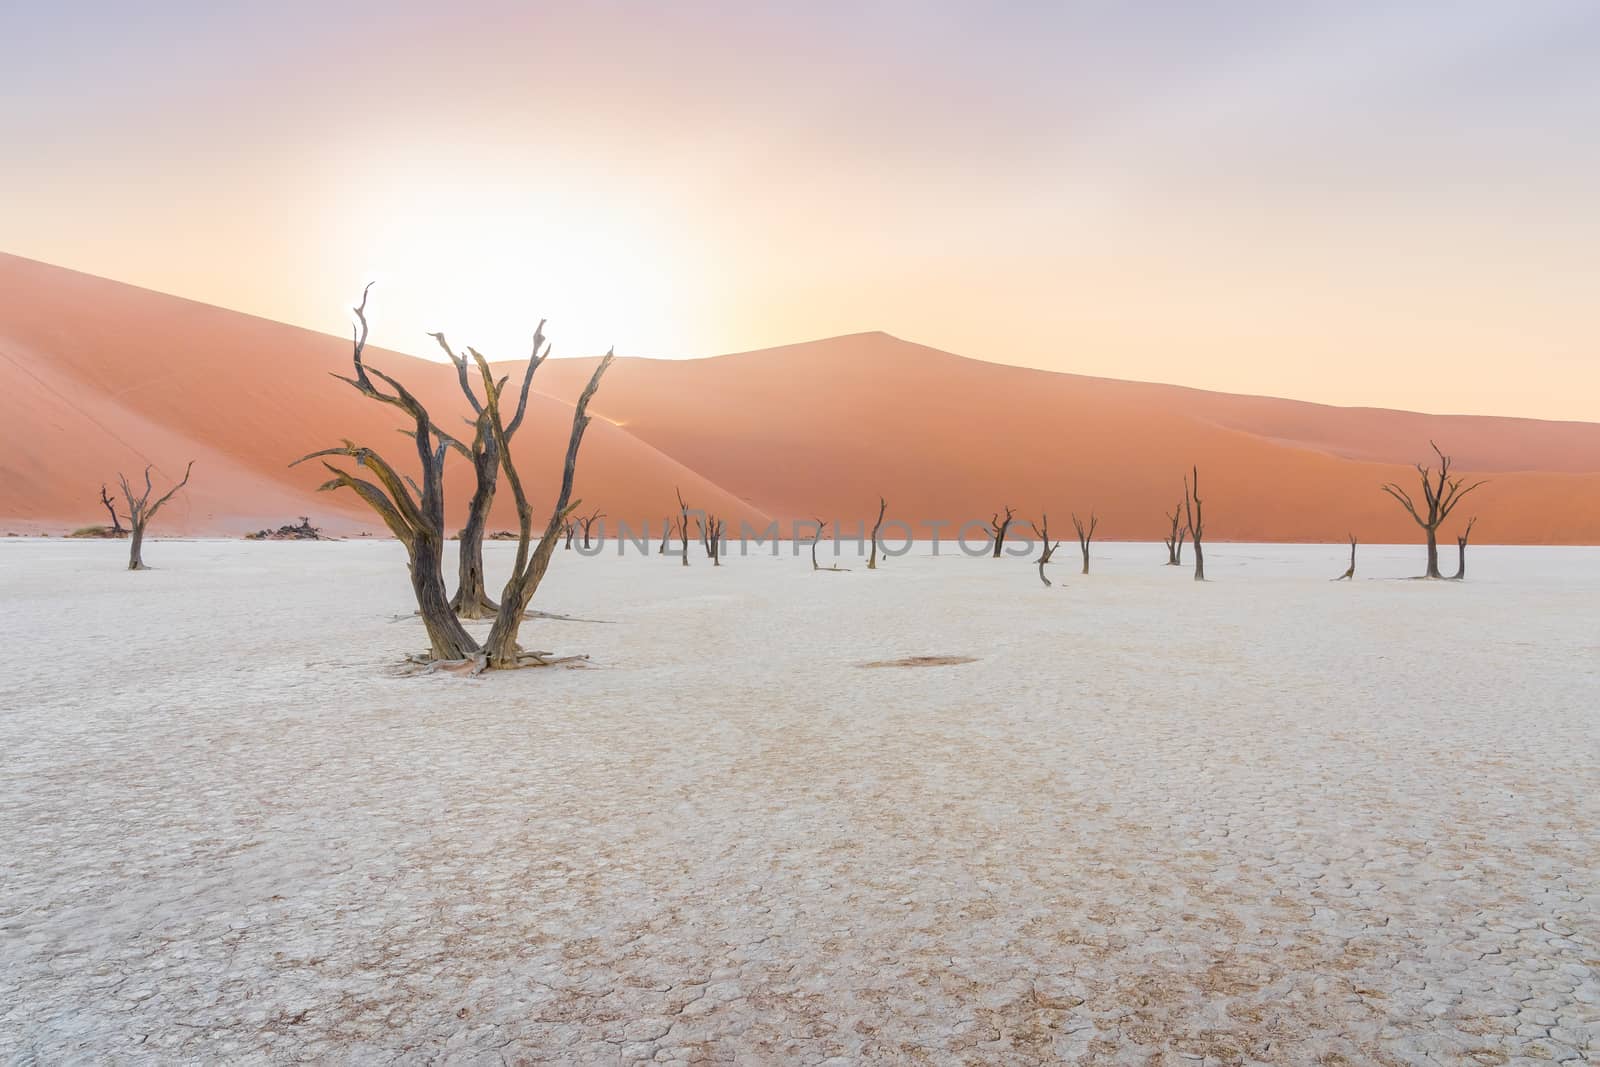 Dead trees at Deadvlei in the Namib desert in Namibia. by maramade